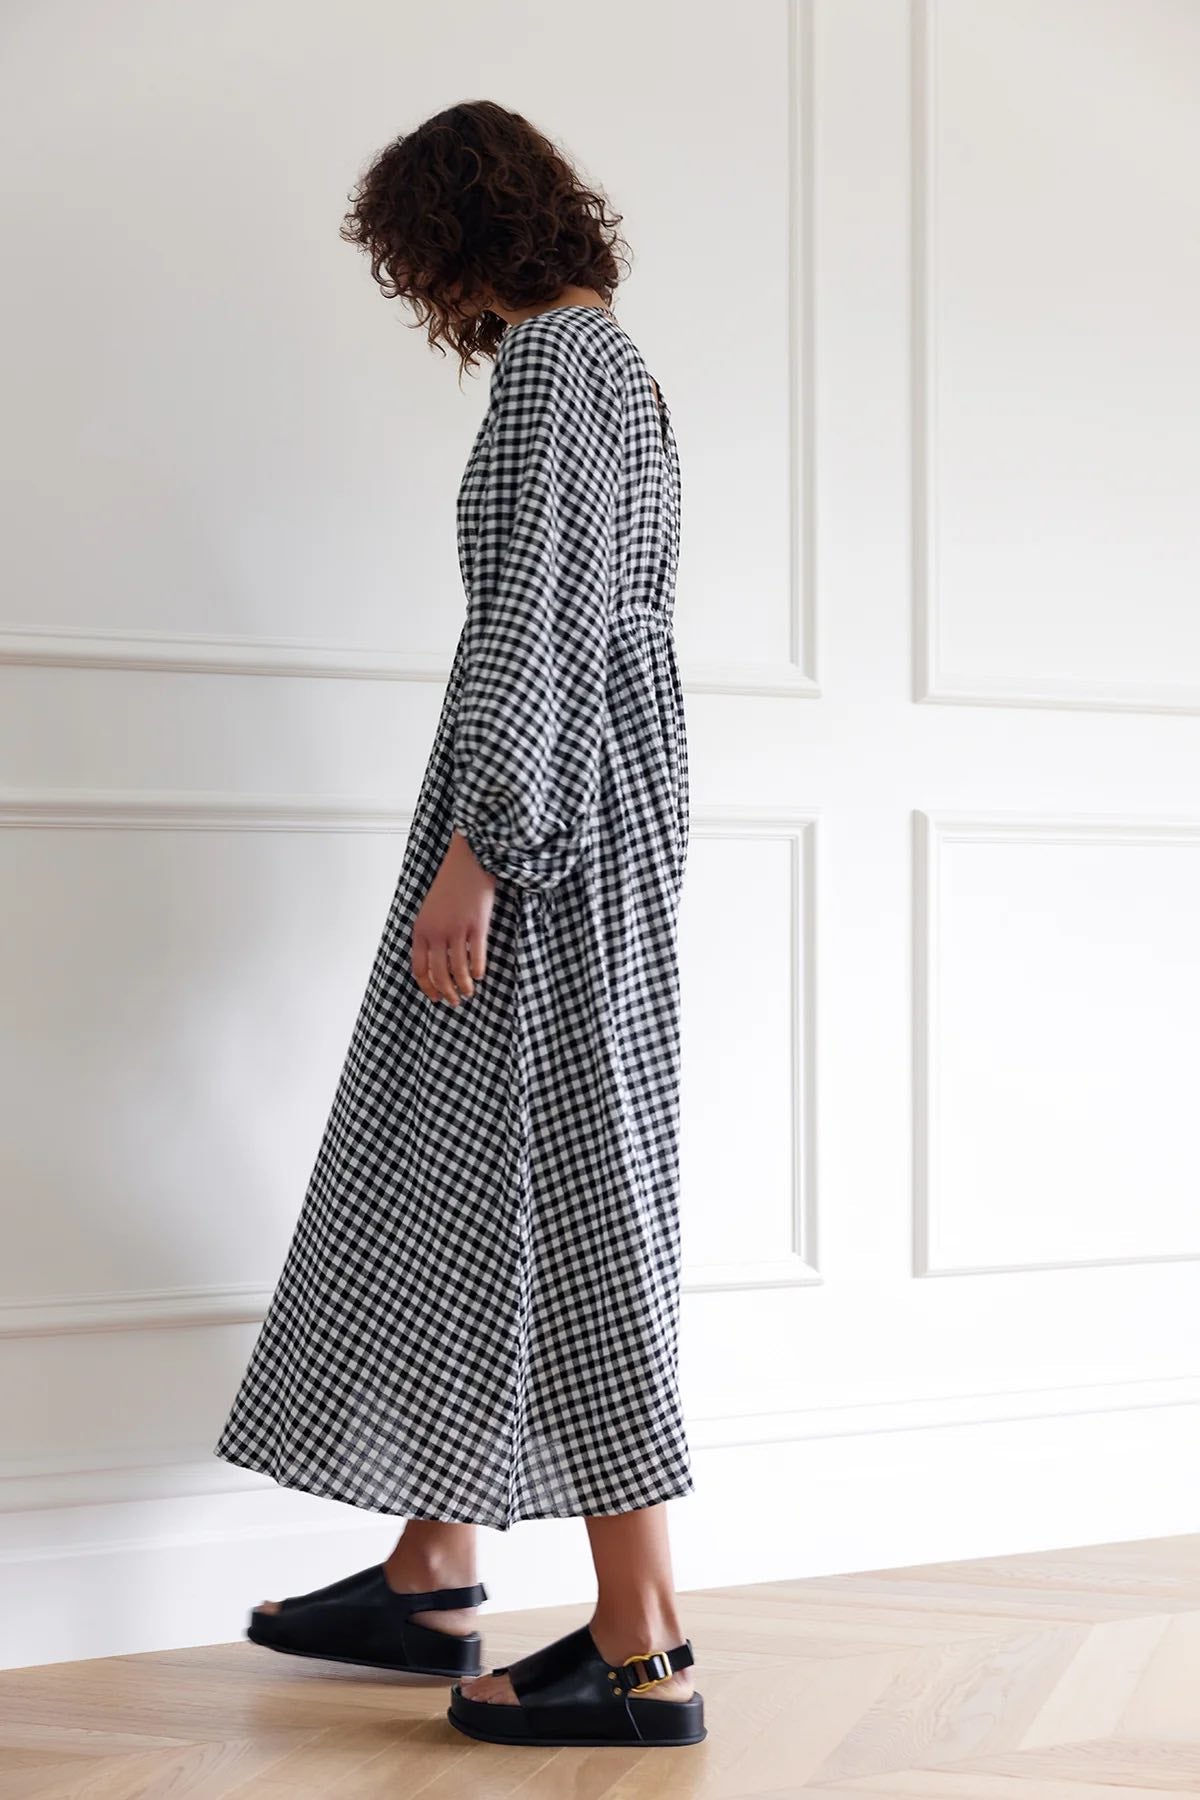 Bowie Dress - Black and Ivory Gingham